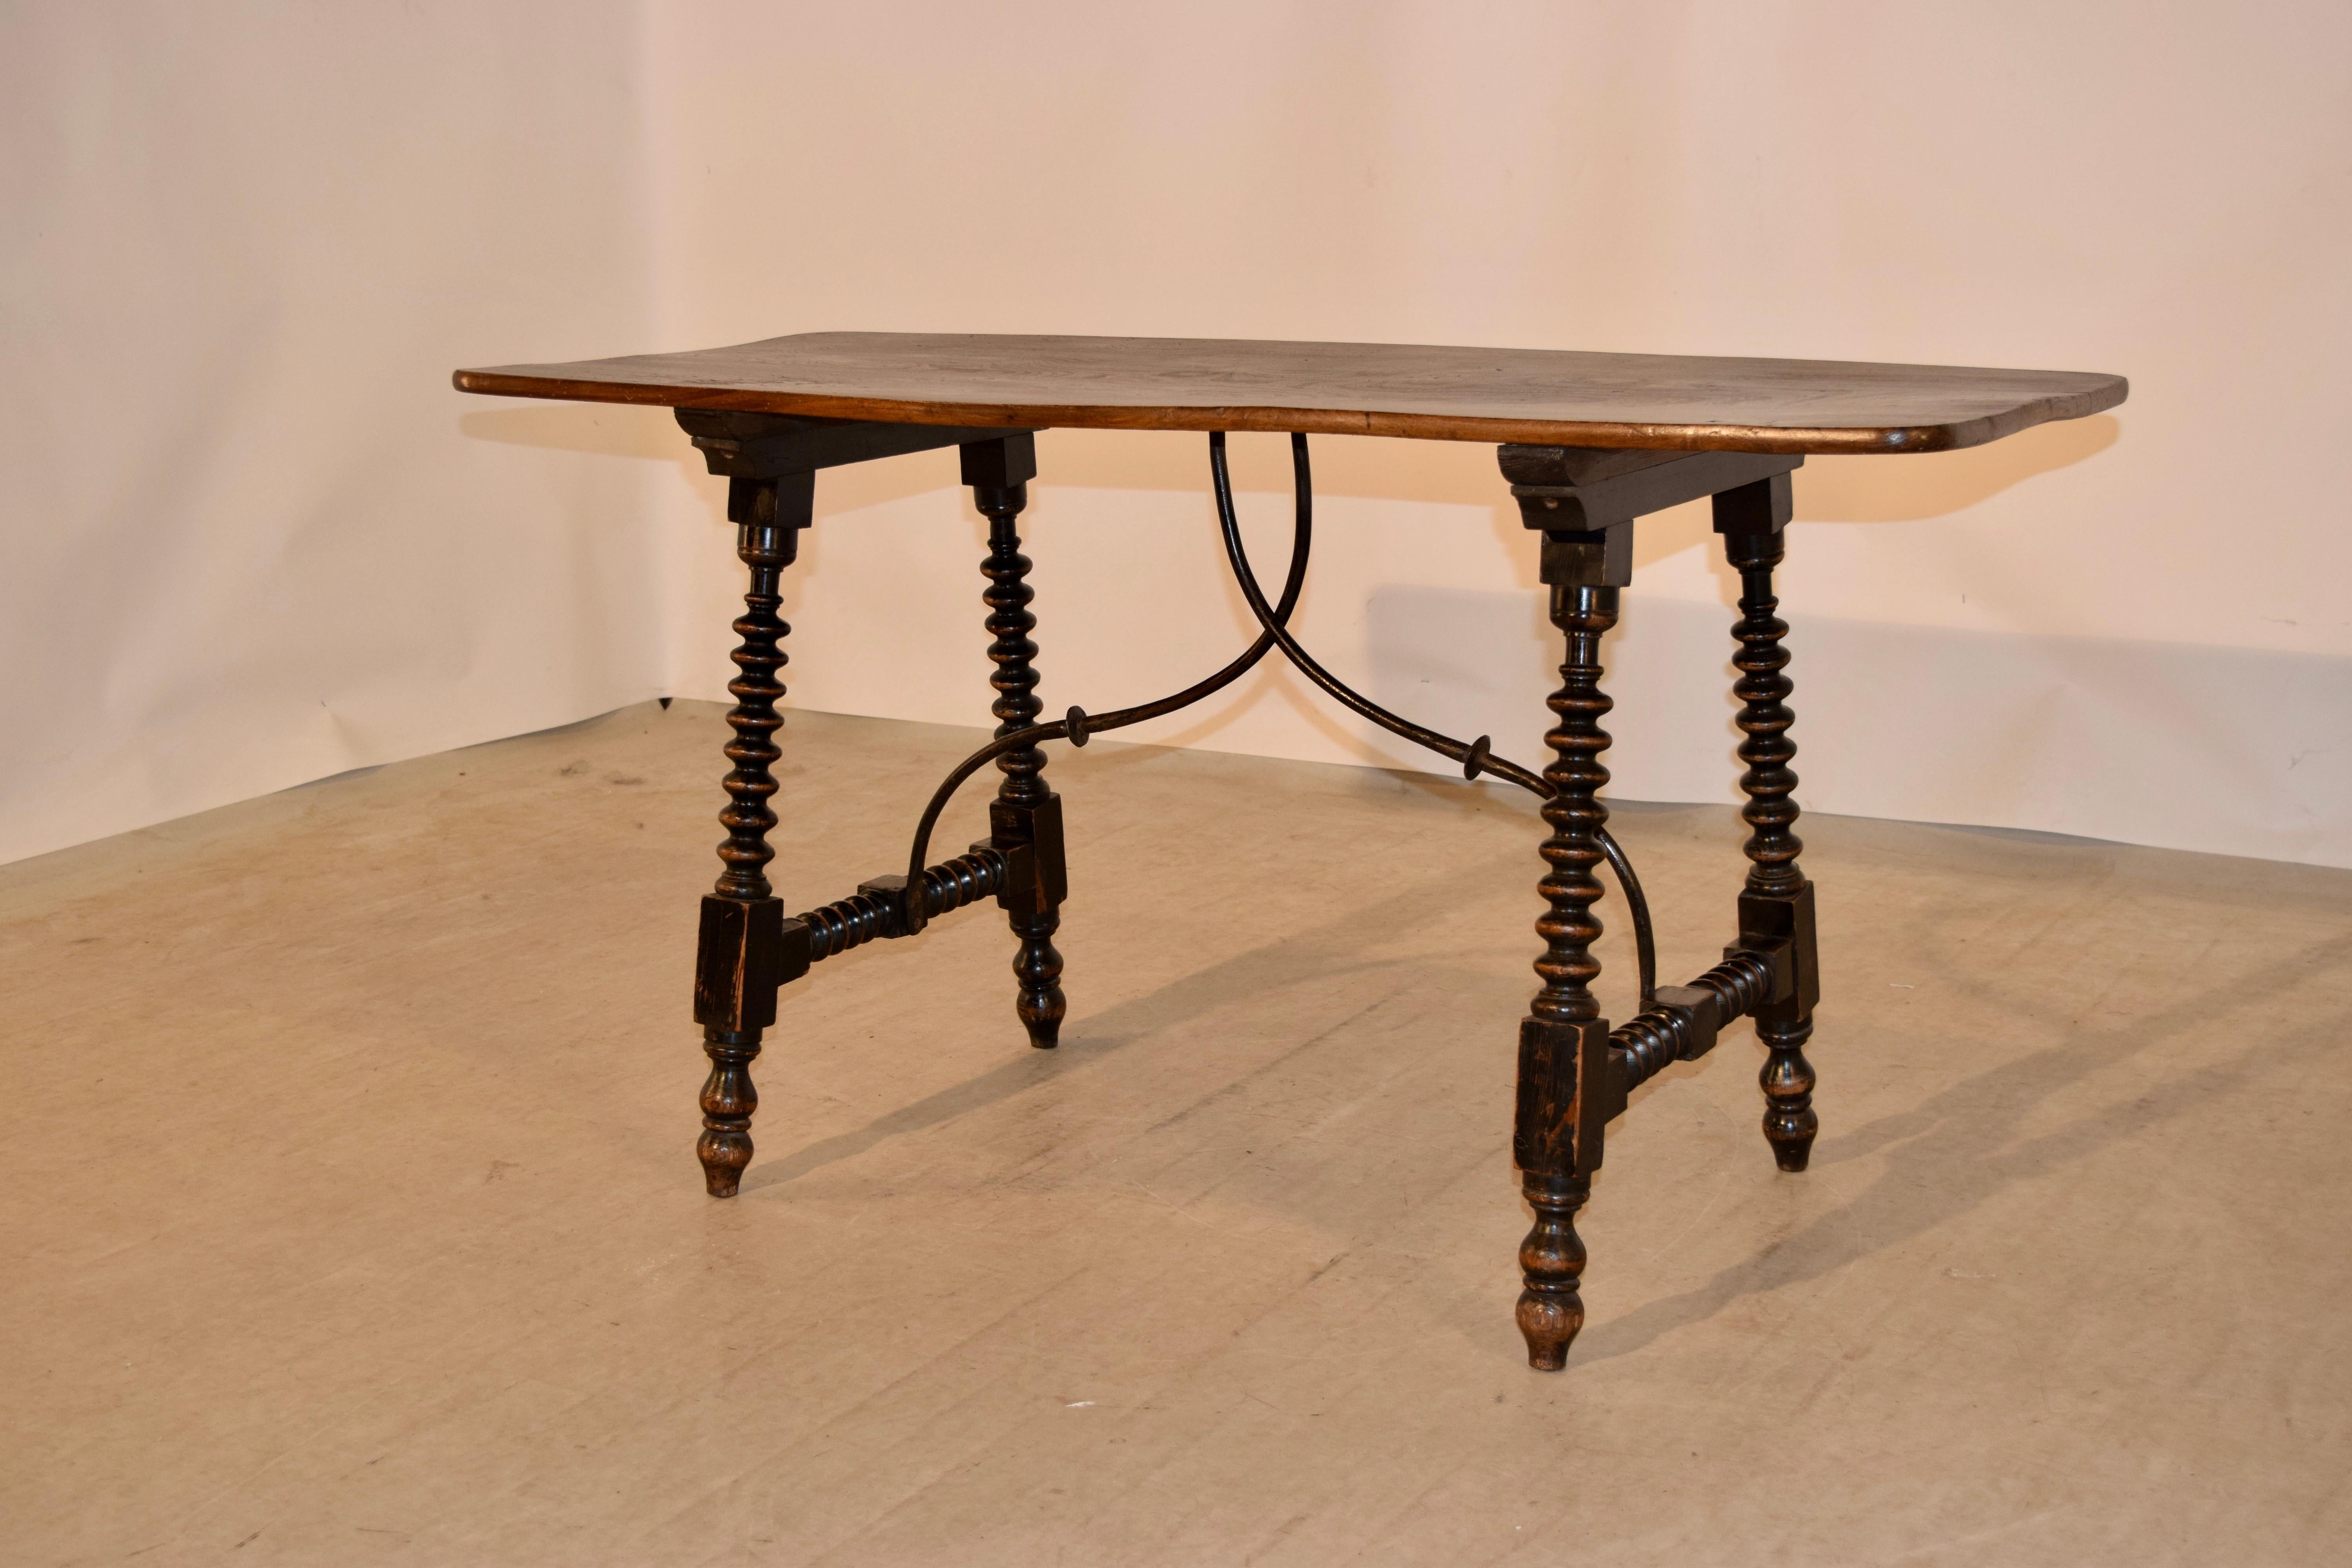 19th century table made from walnut and elm. The top is wonderfully grained curly elm, following down to a base made from walnut with a nicely turned spool shaped legs, joined by matching stretchers and braced together in the centre of the table